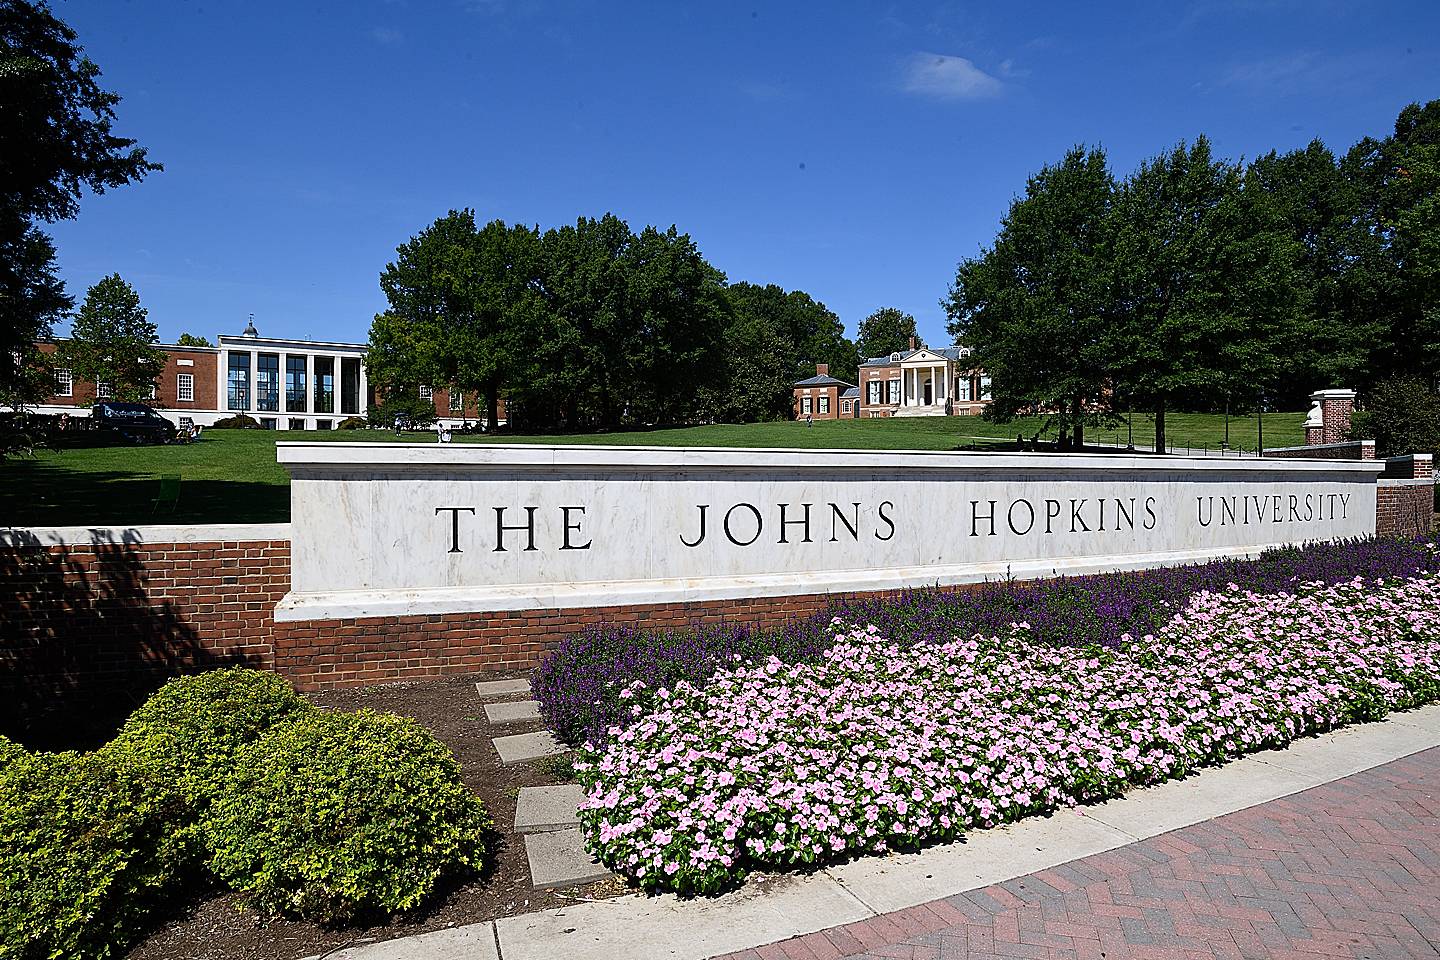 Indispensable Role of Blacks at JHU announces Class of 2021 | Hub